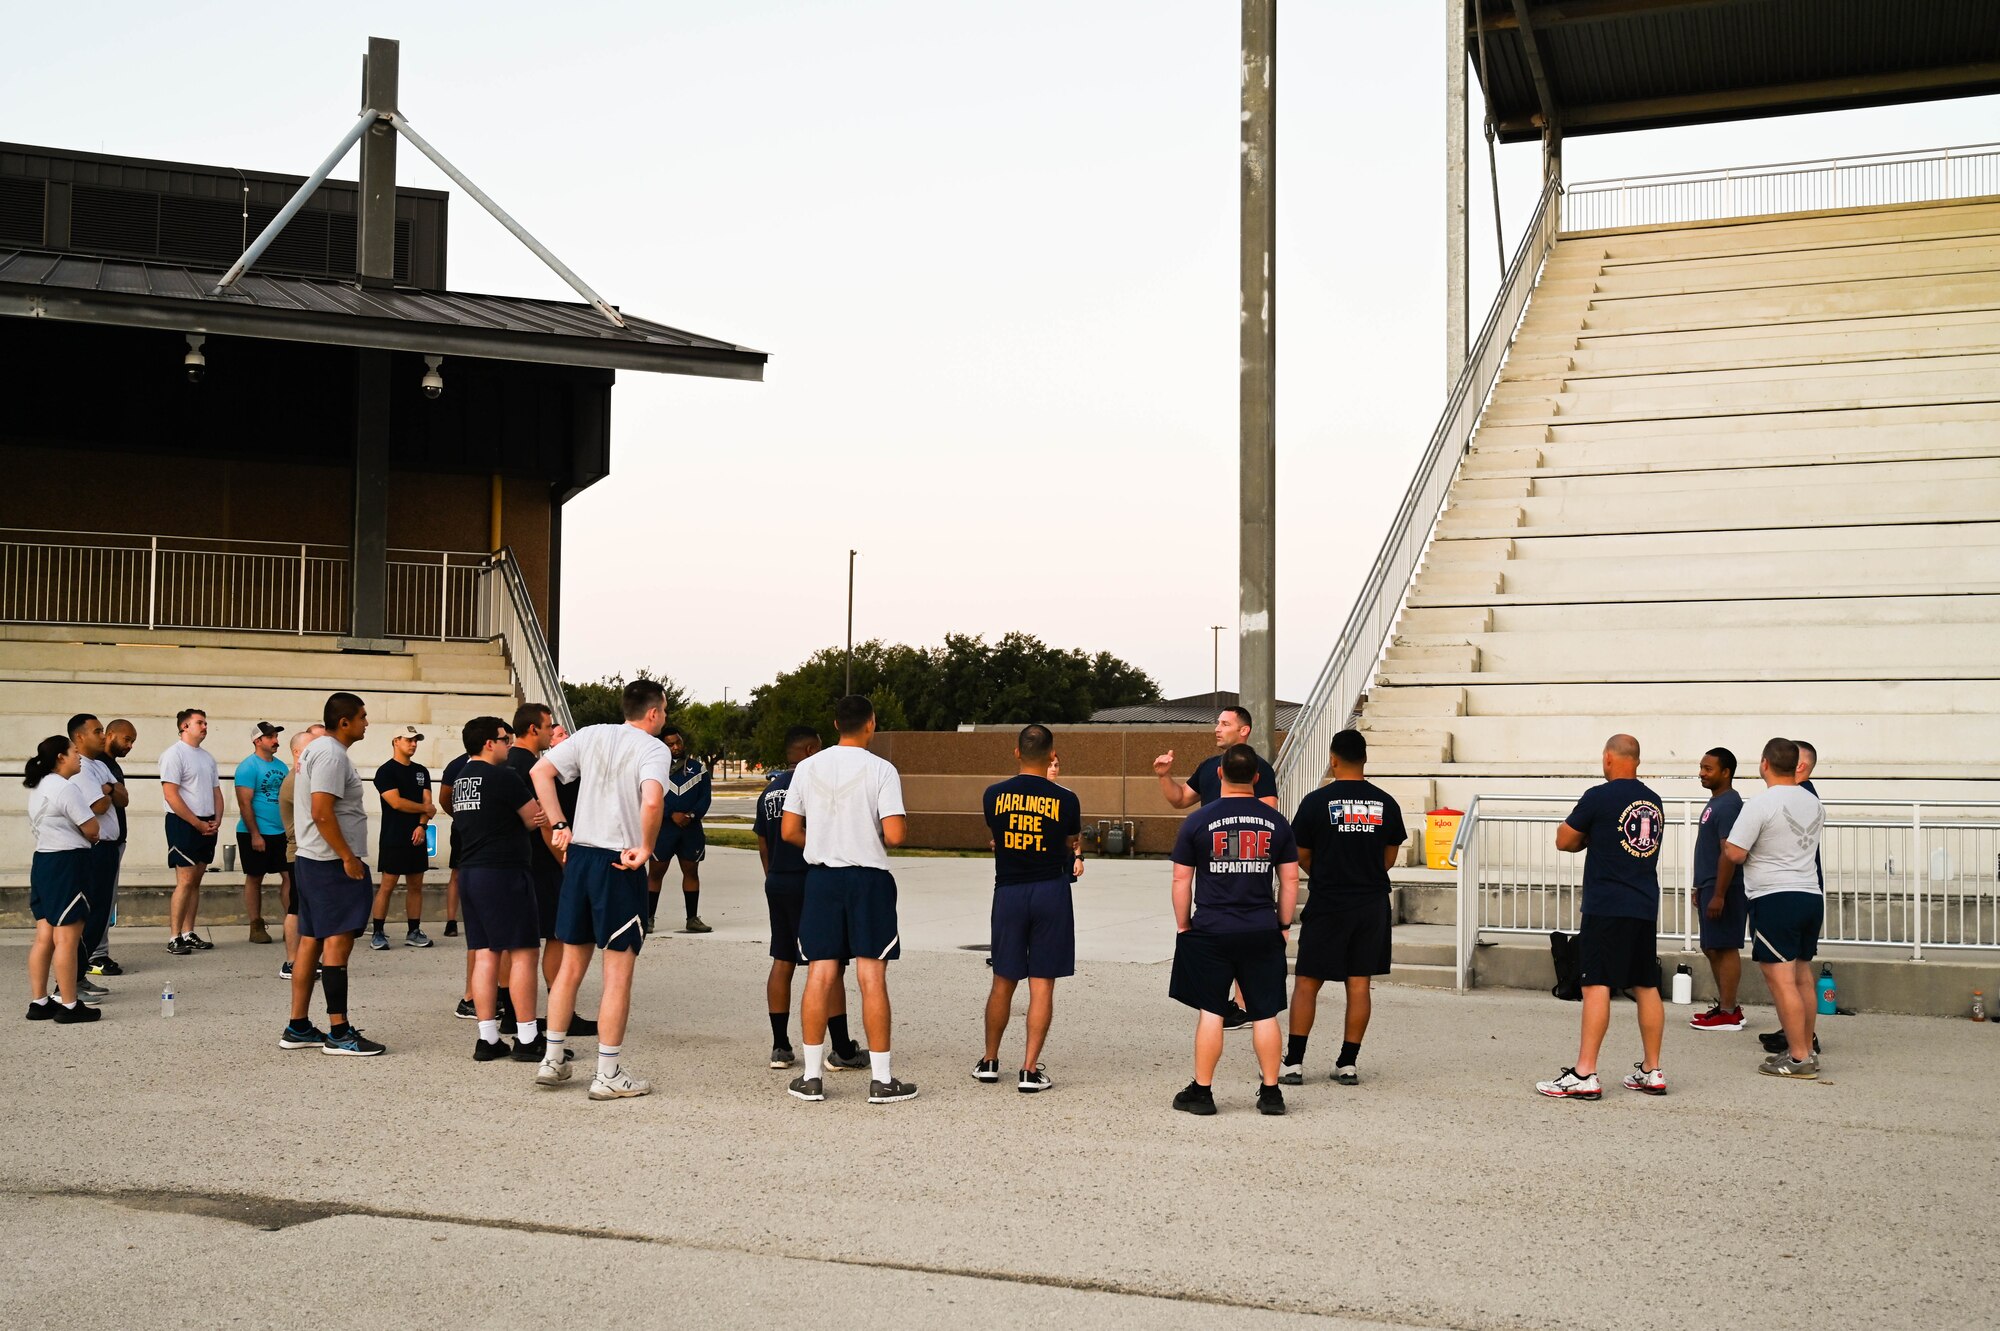 Senior Master Sgt. Joshua Moss, 433rd Civil Engineer Squadron Fire Chief, briefs Airmen before starting the unit’s annual 9/11 Memorial Stair Climb outside the Pfingston Reception Center on Joint Base San Antonio-Lackland, Texas on Sep. 10, 2023.